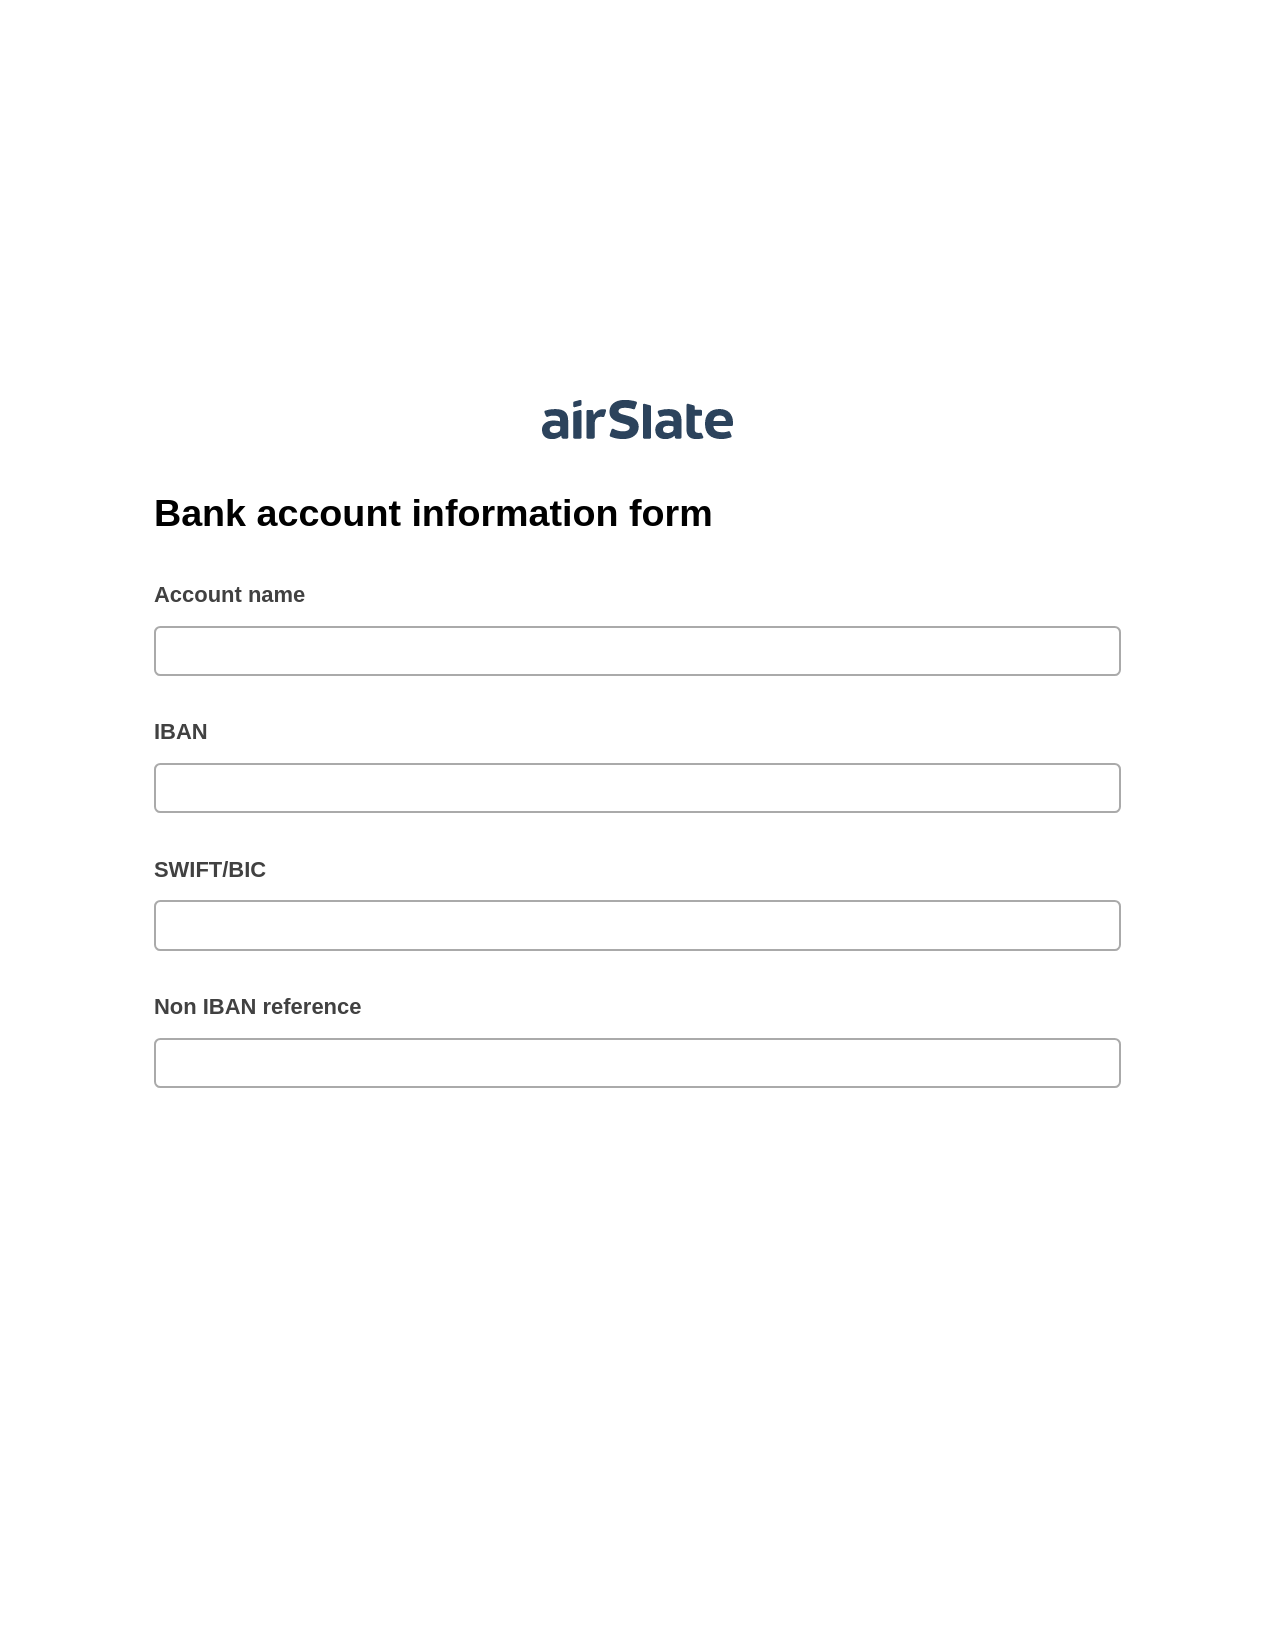 Multirole Bank account information form Pre-fill from CSV File Dropdown Options Bot, Audit Trail Bot, Box Bot